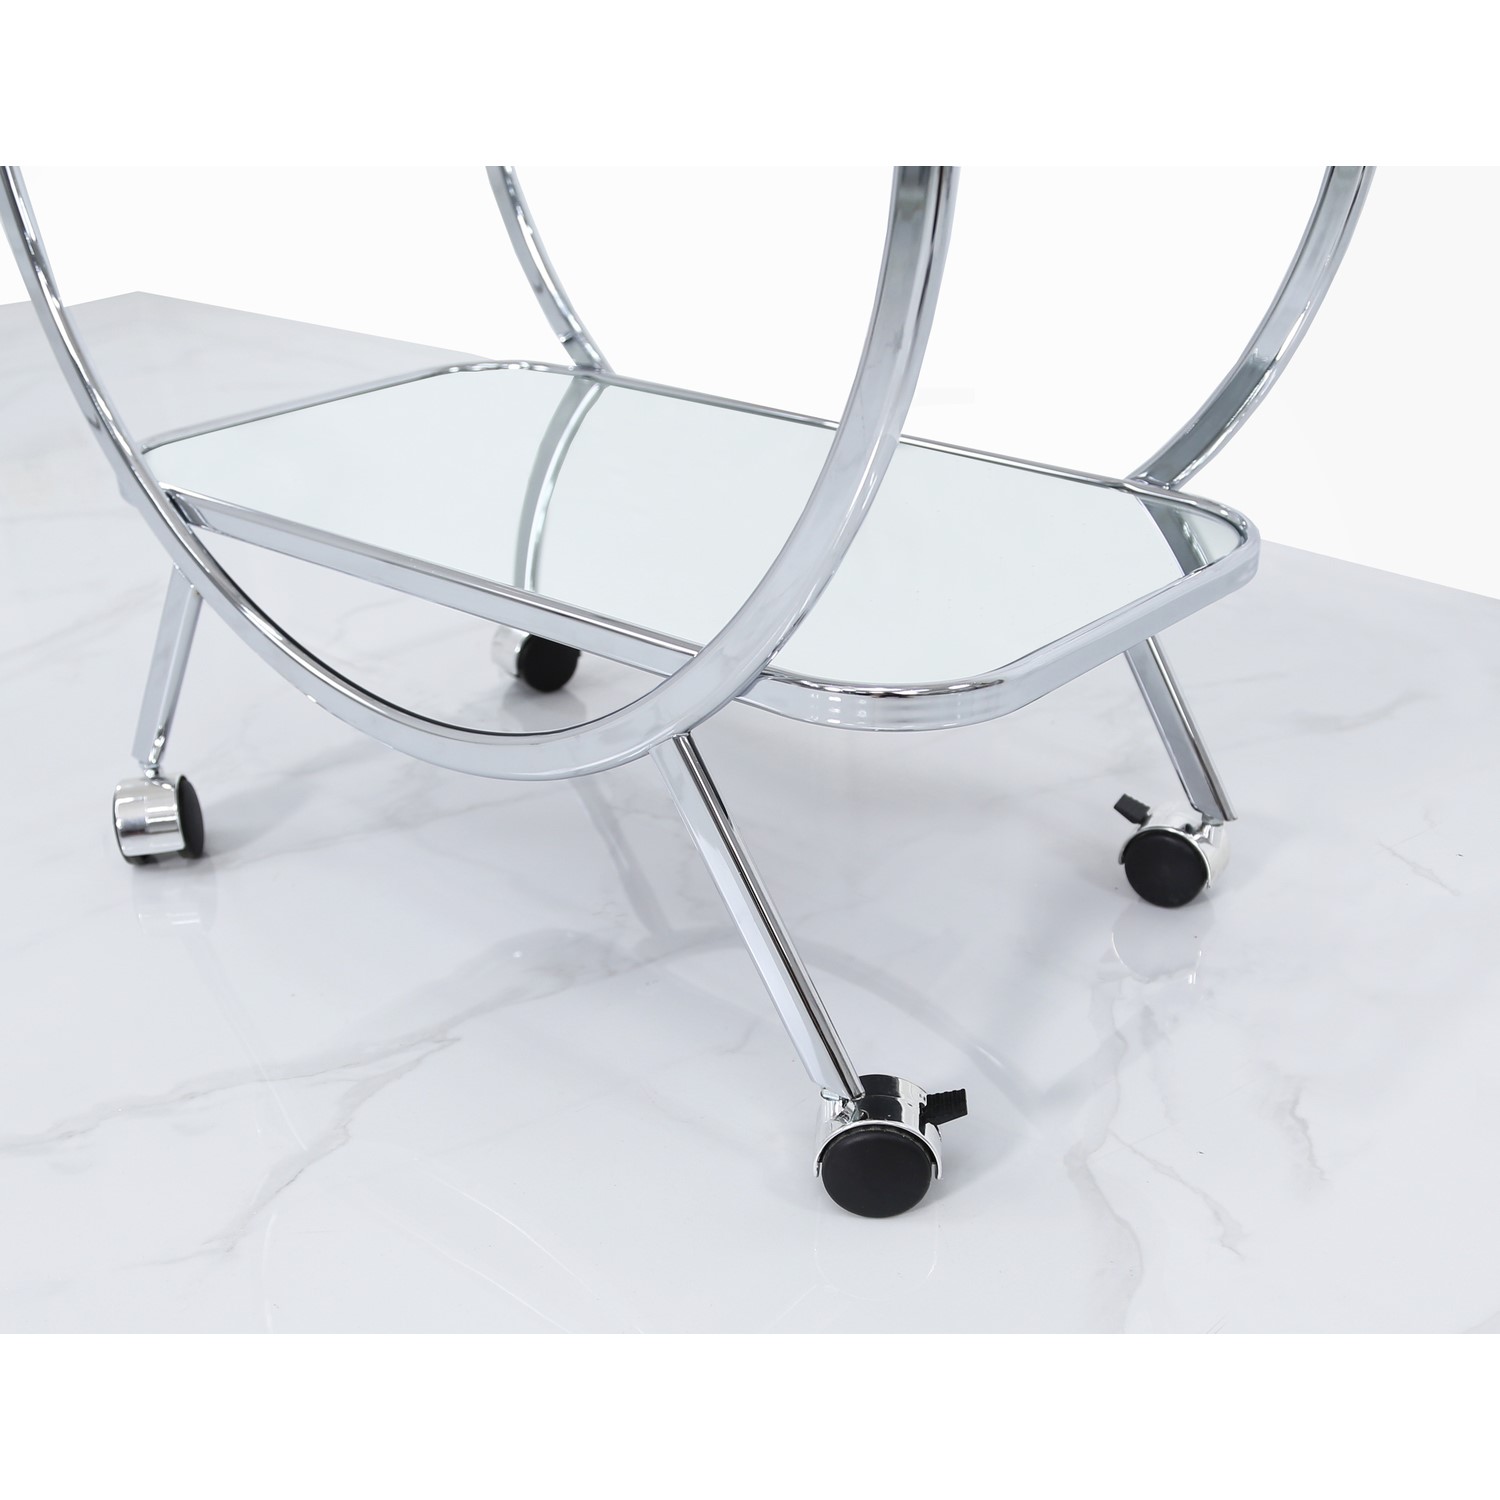 Read more about Silver bar cart with chrome & glass aurora boutique